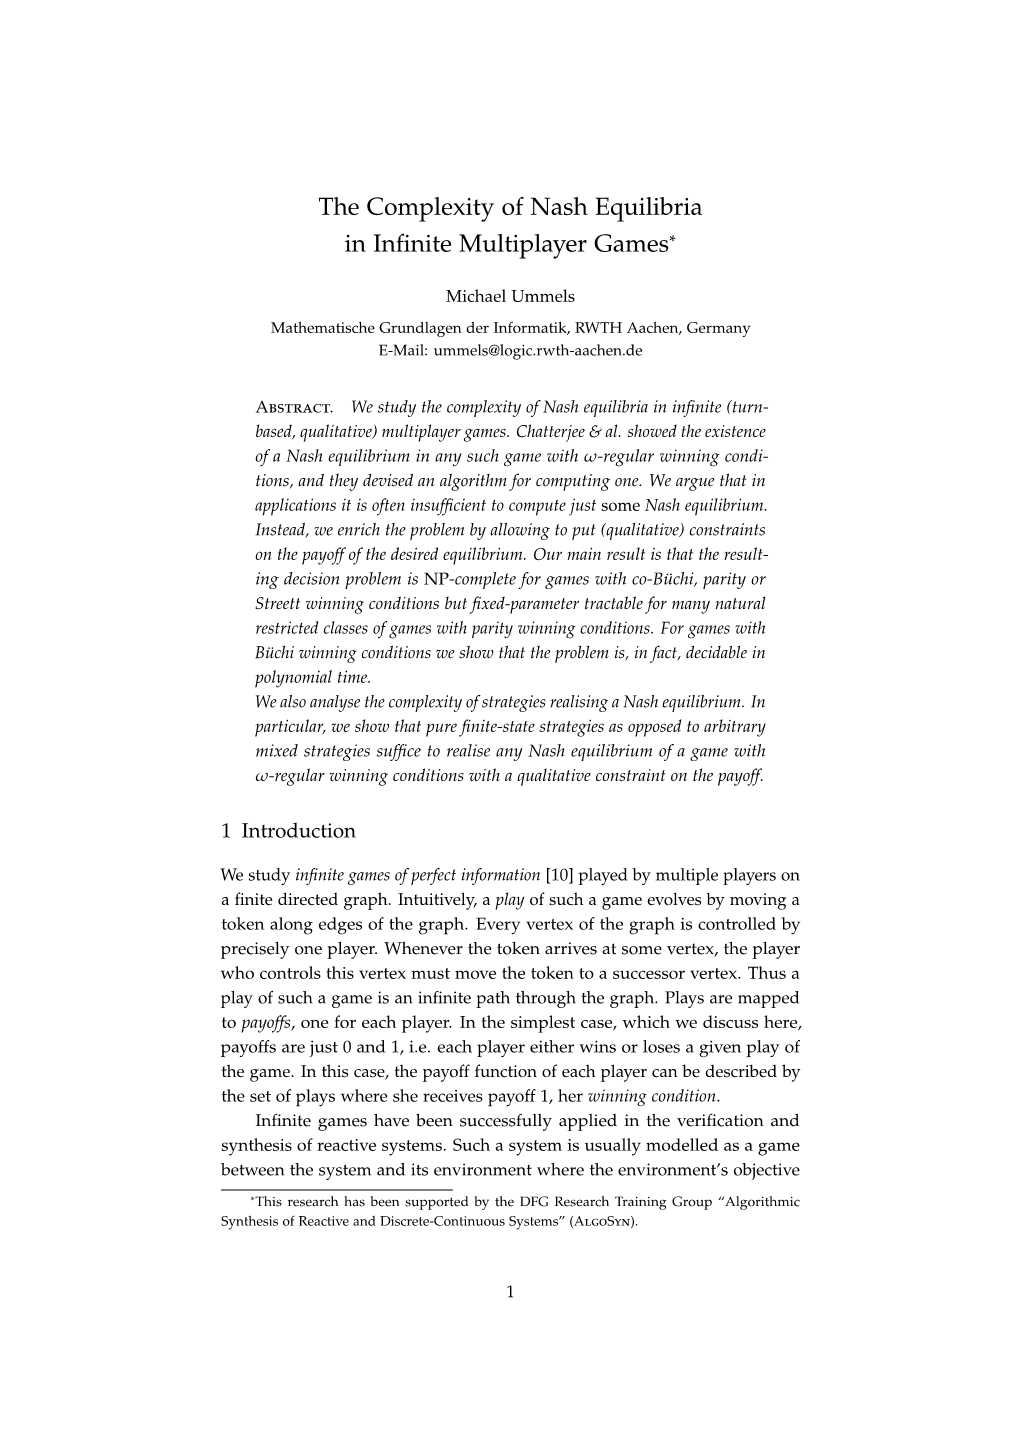 The Complexity of Nash Equilibria in Infinite Multiplayer Games*